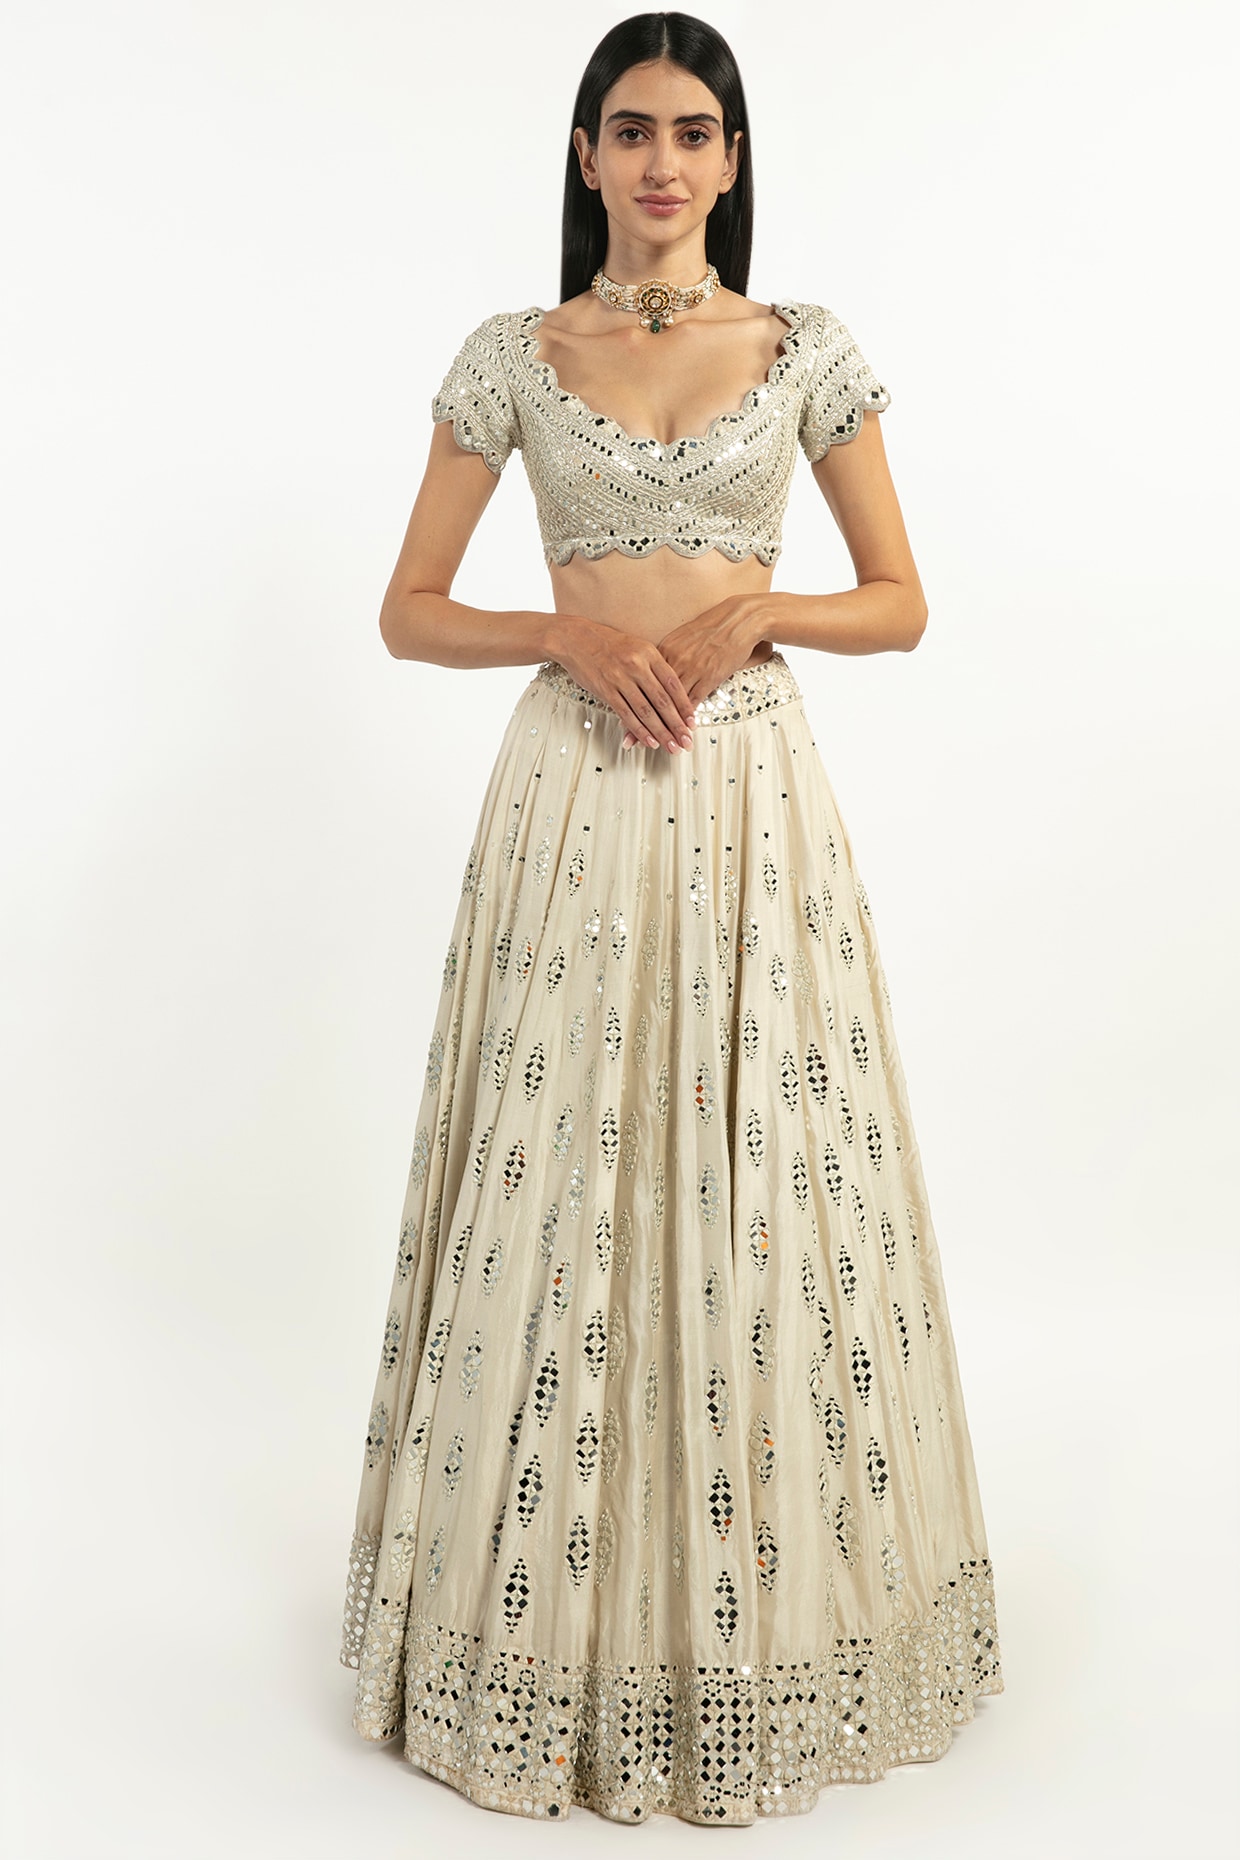 The first ever bridal couture collection by designer Abhinav Mishra